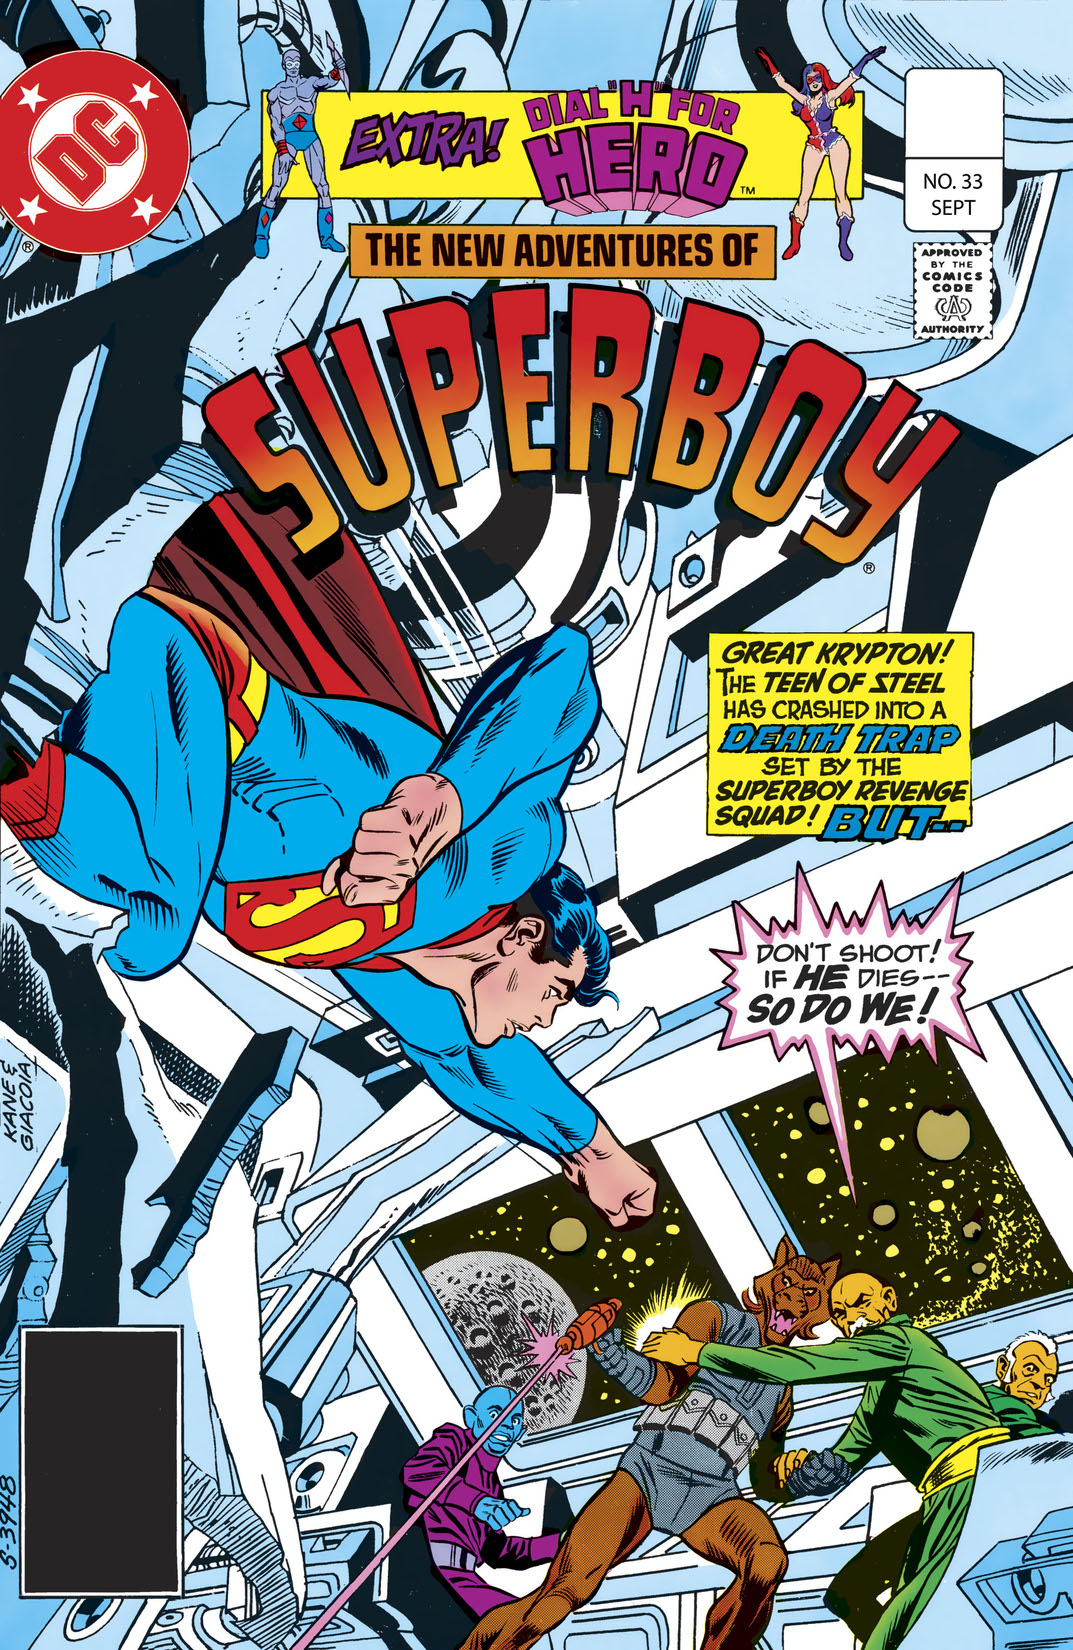 New Adventures of Superboy #33 preview images